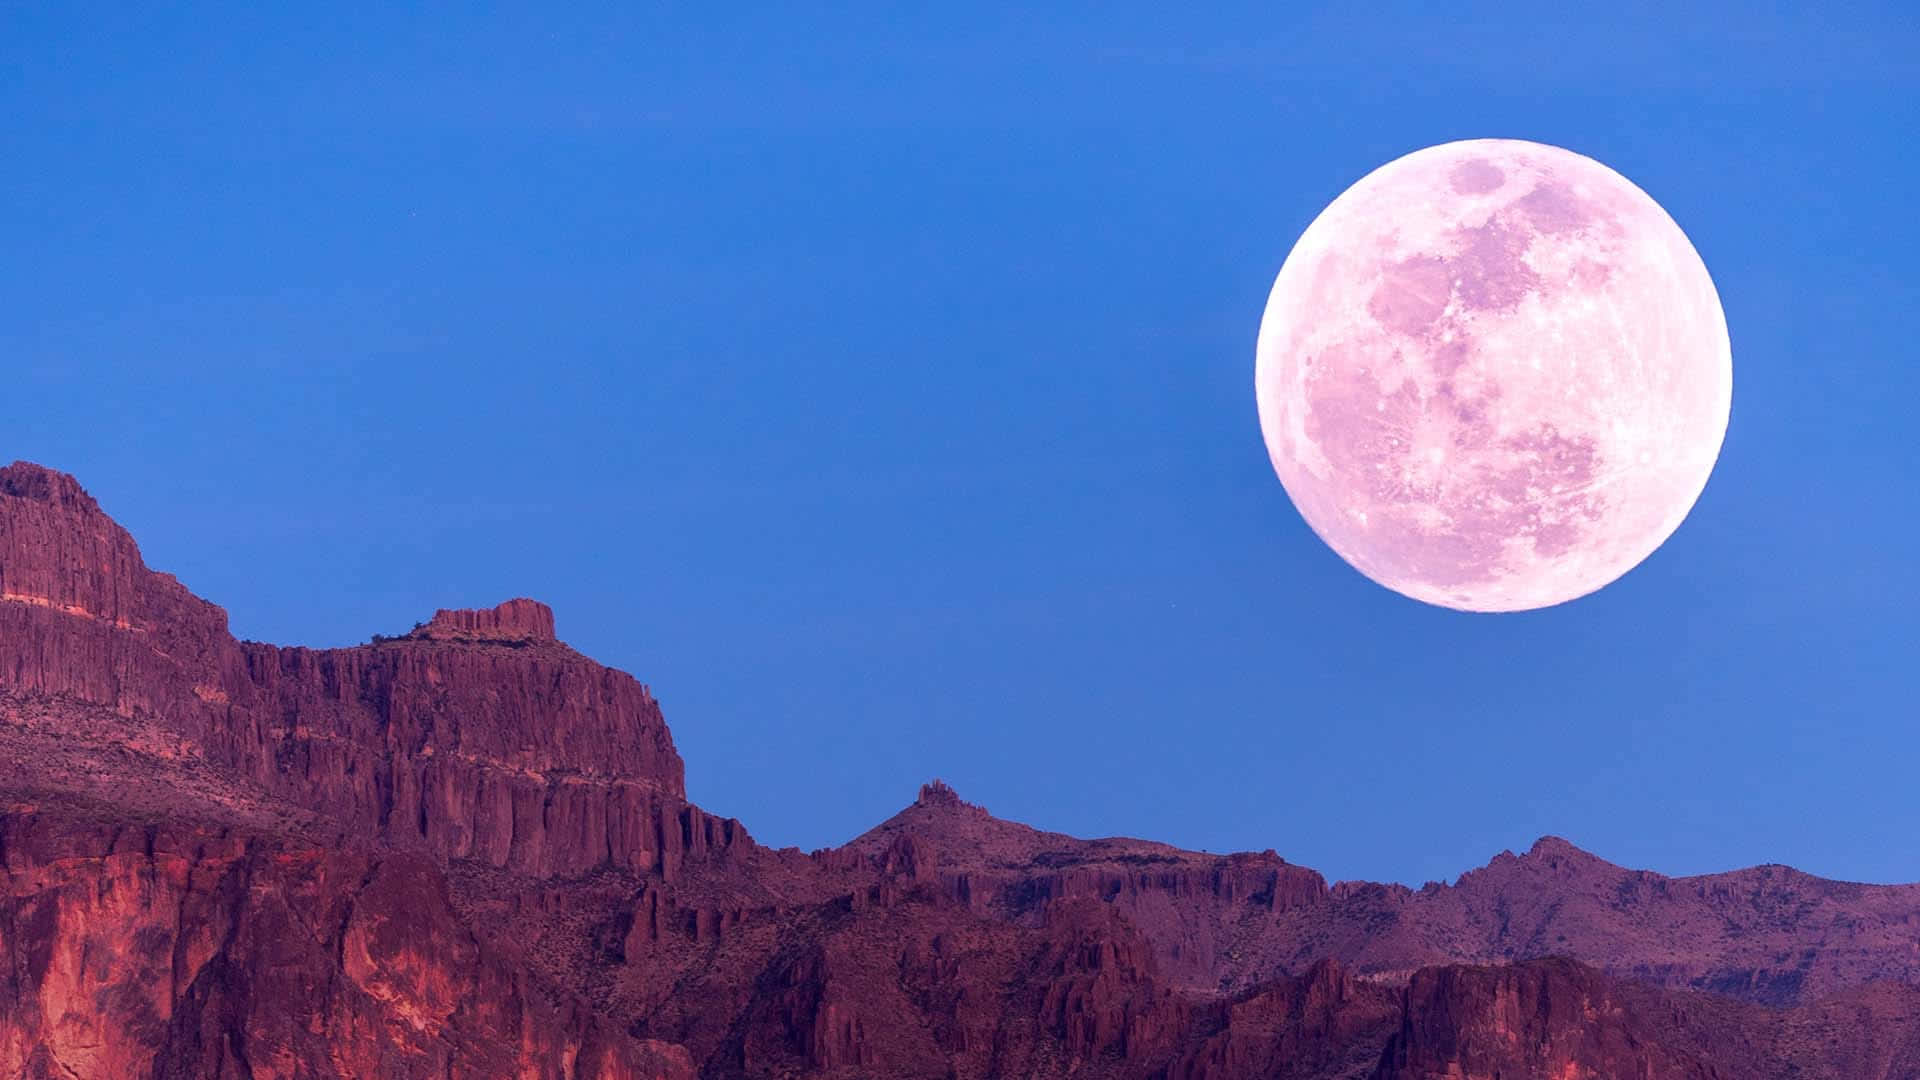 See the beautiful pink hue of the night sky with the Pink Moon overlooking